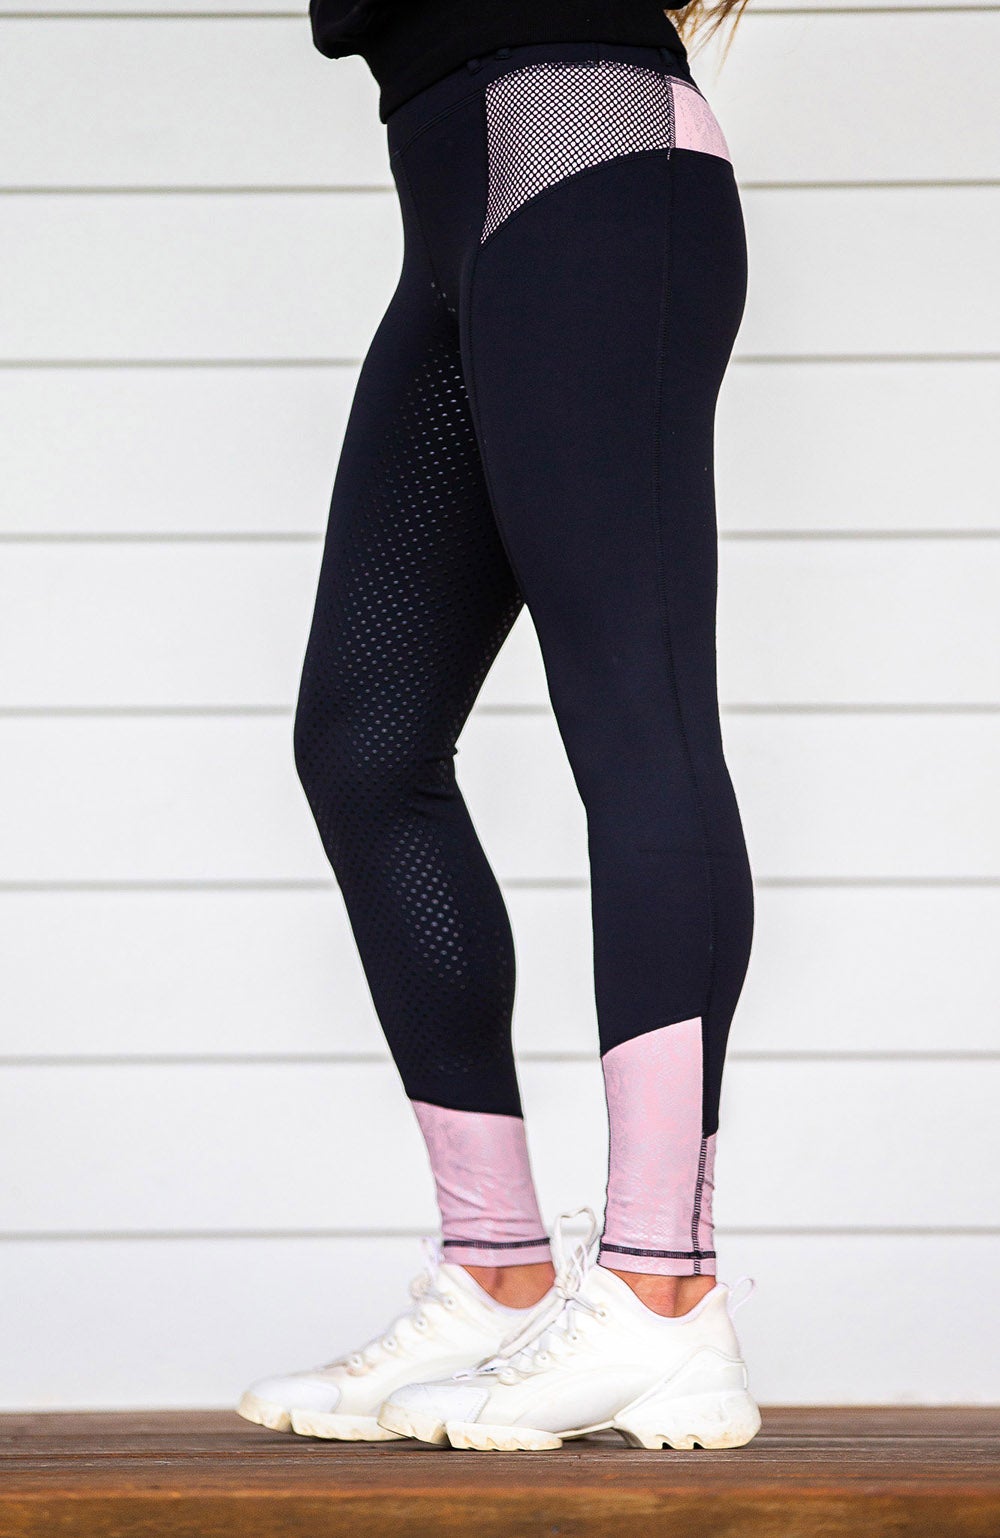 Bare Performance Youth Performance Riding Tights Black Rose